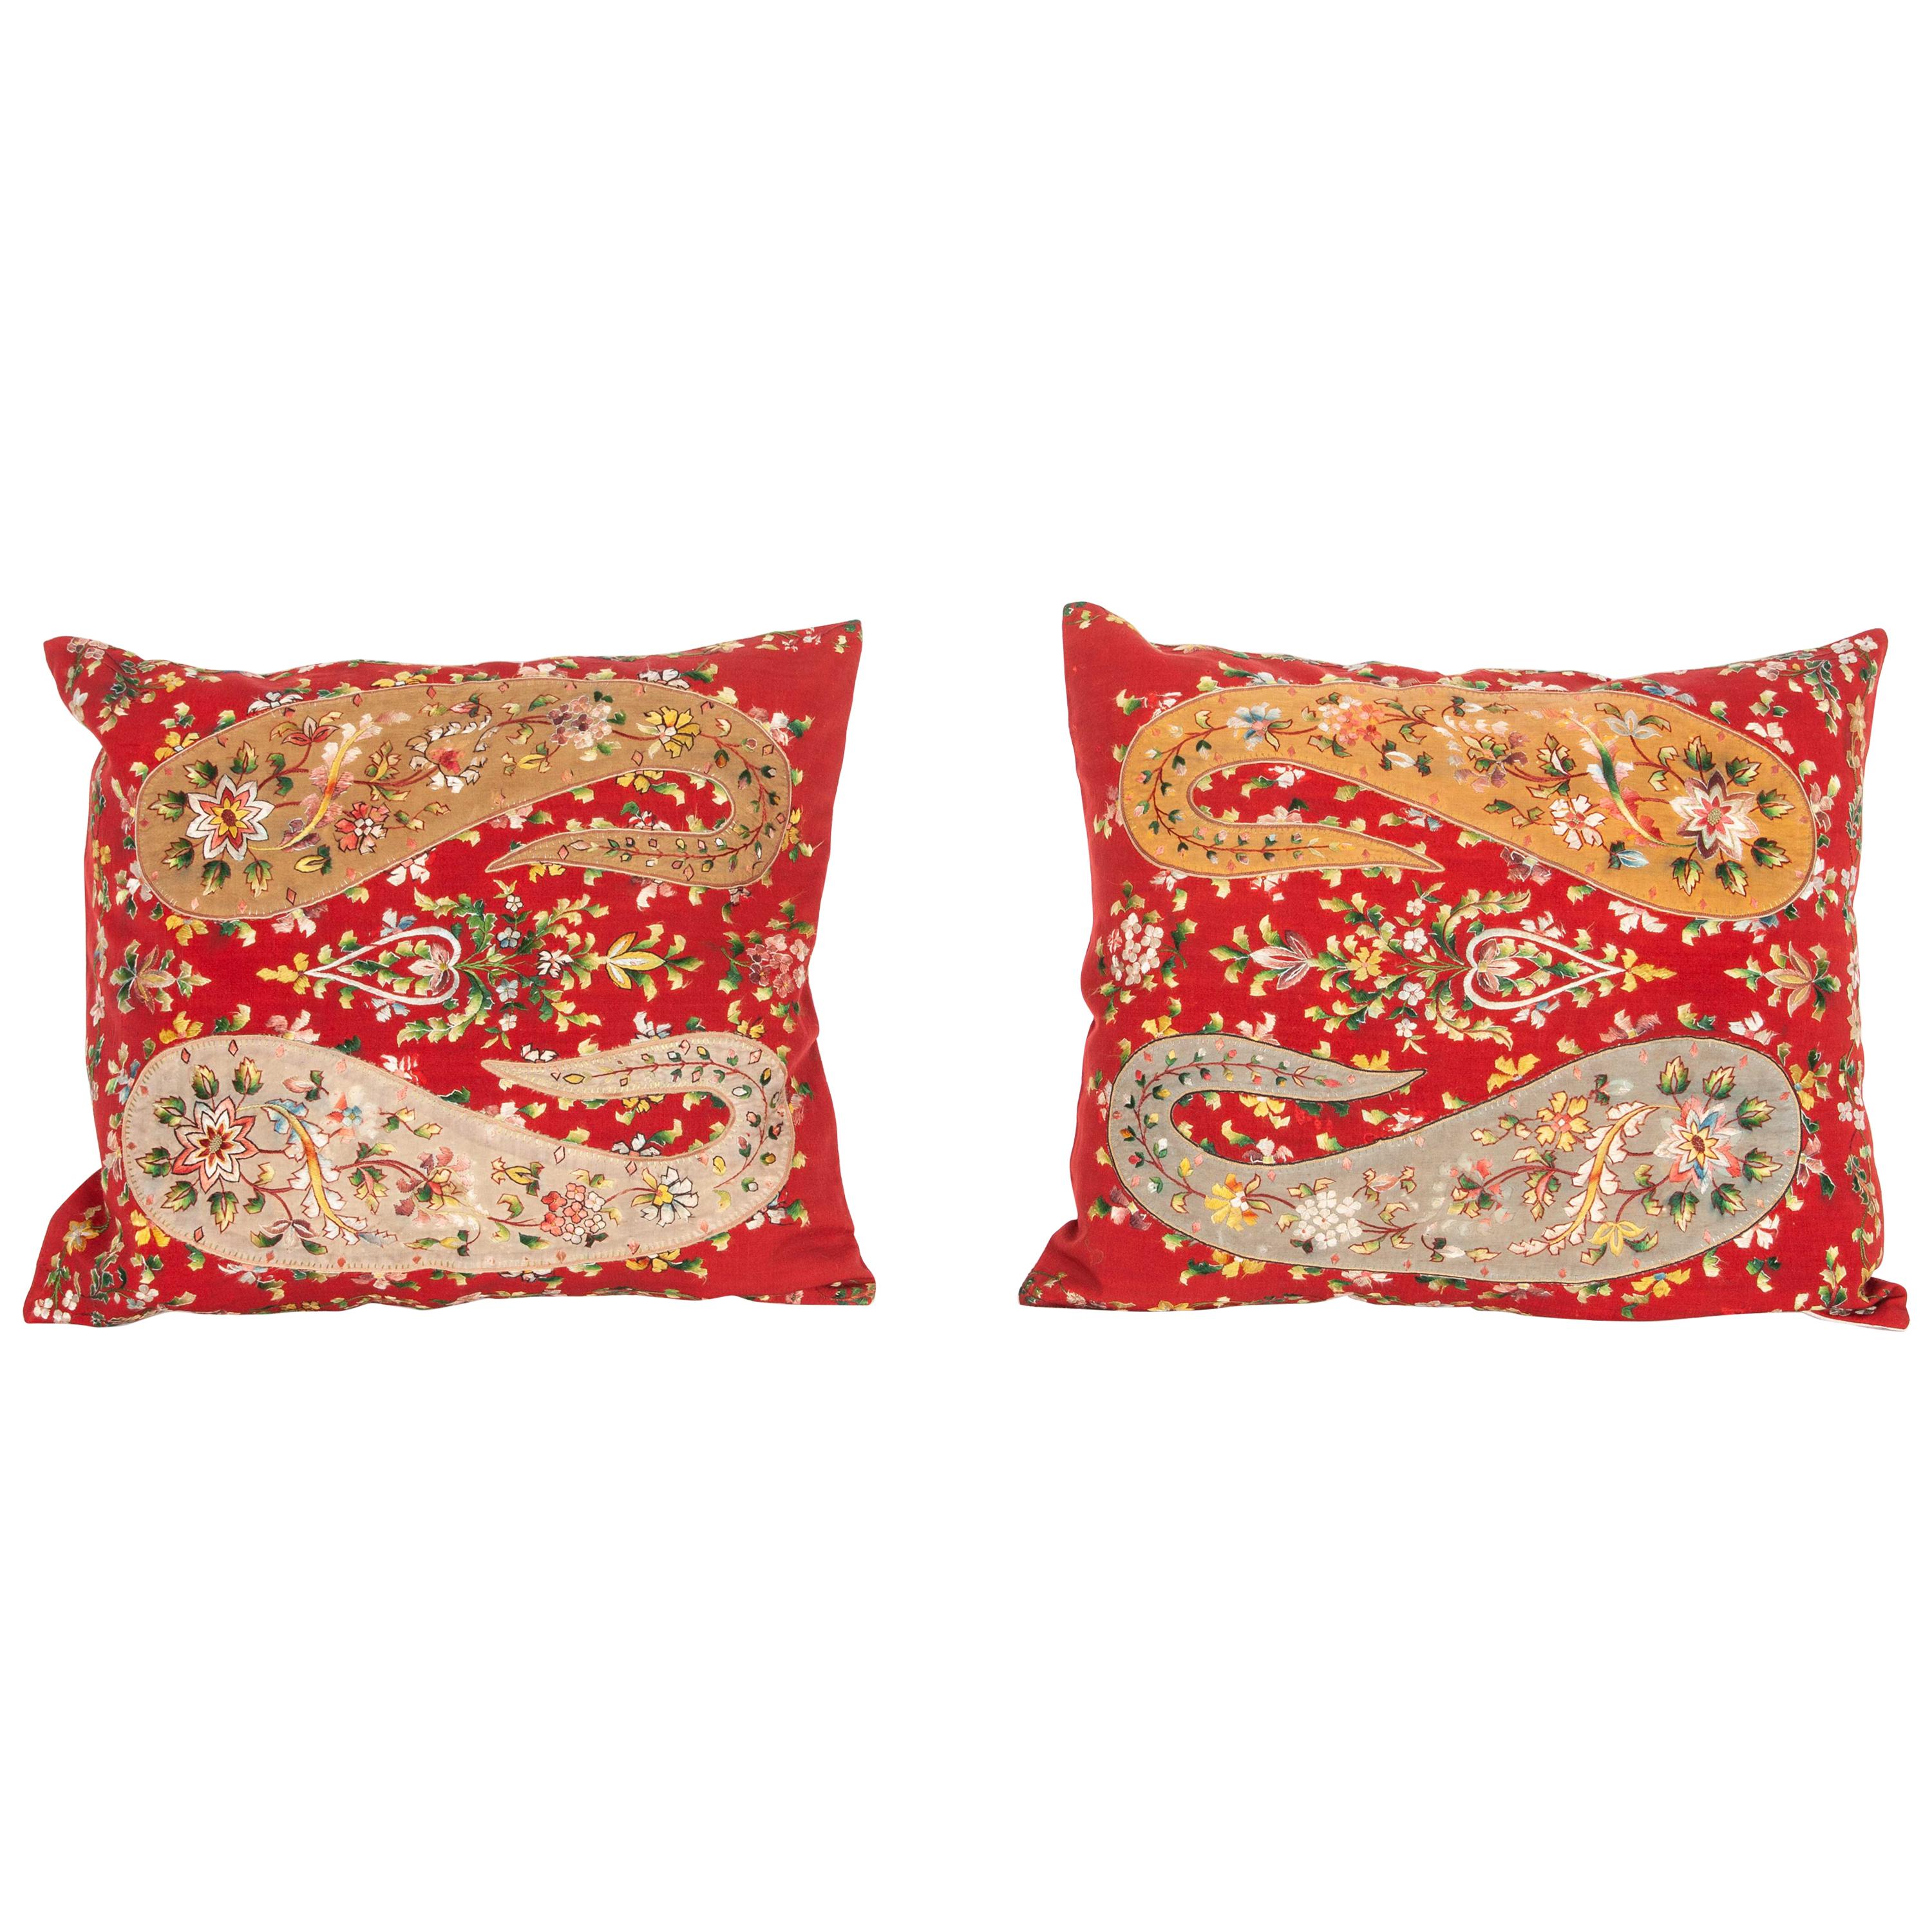 Pillow Cases Fashioned from an Early 20th Century Indian Shawl